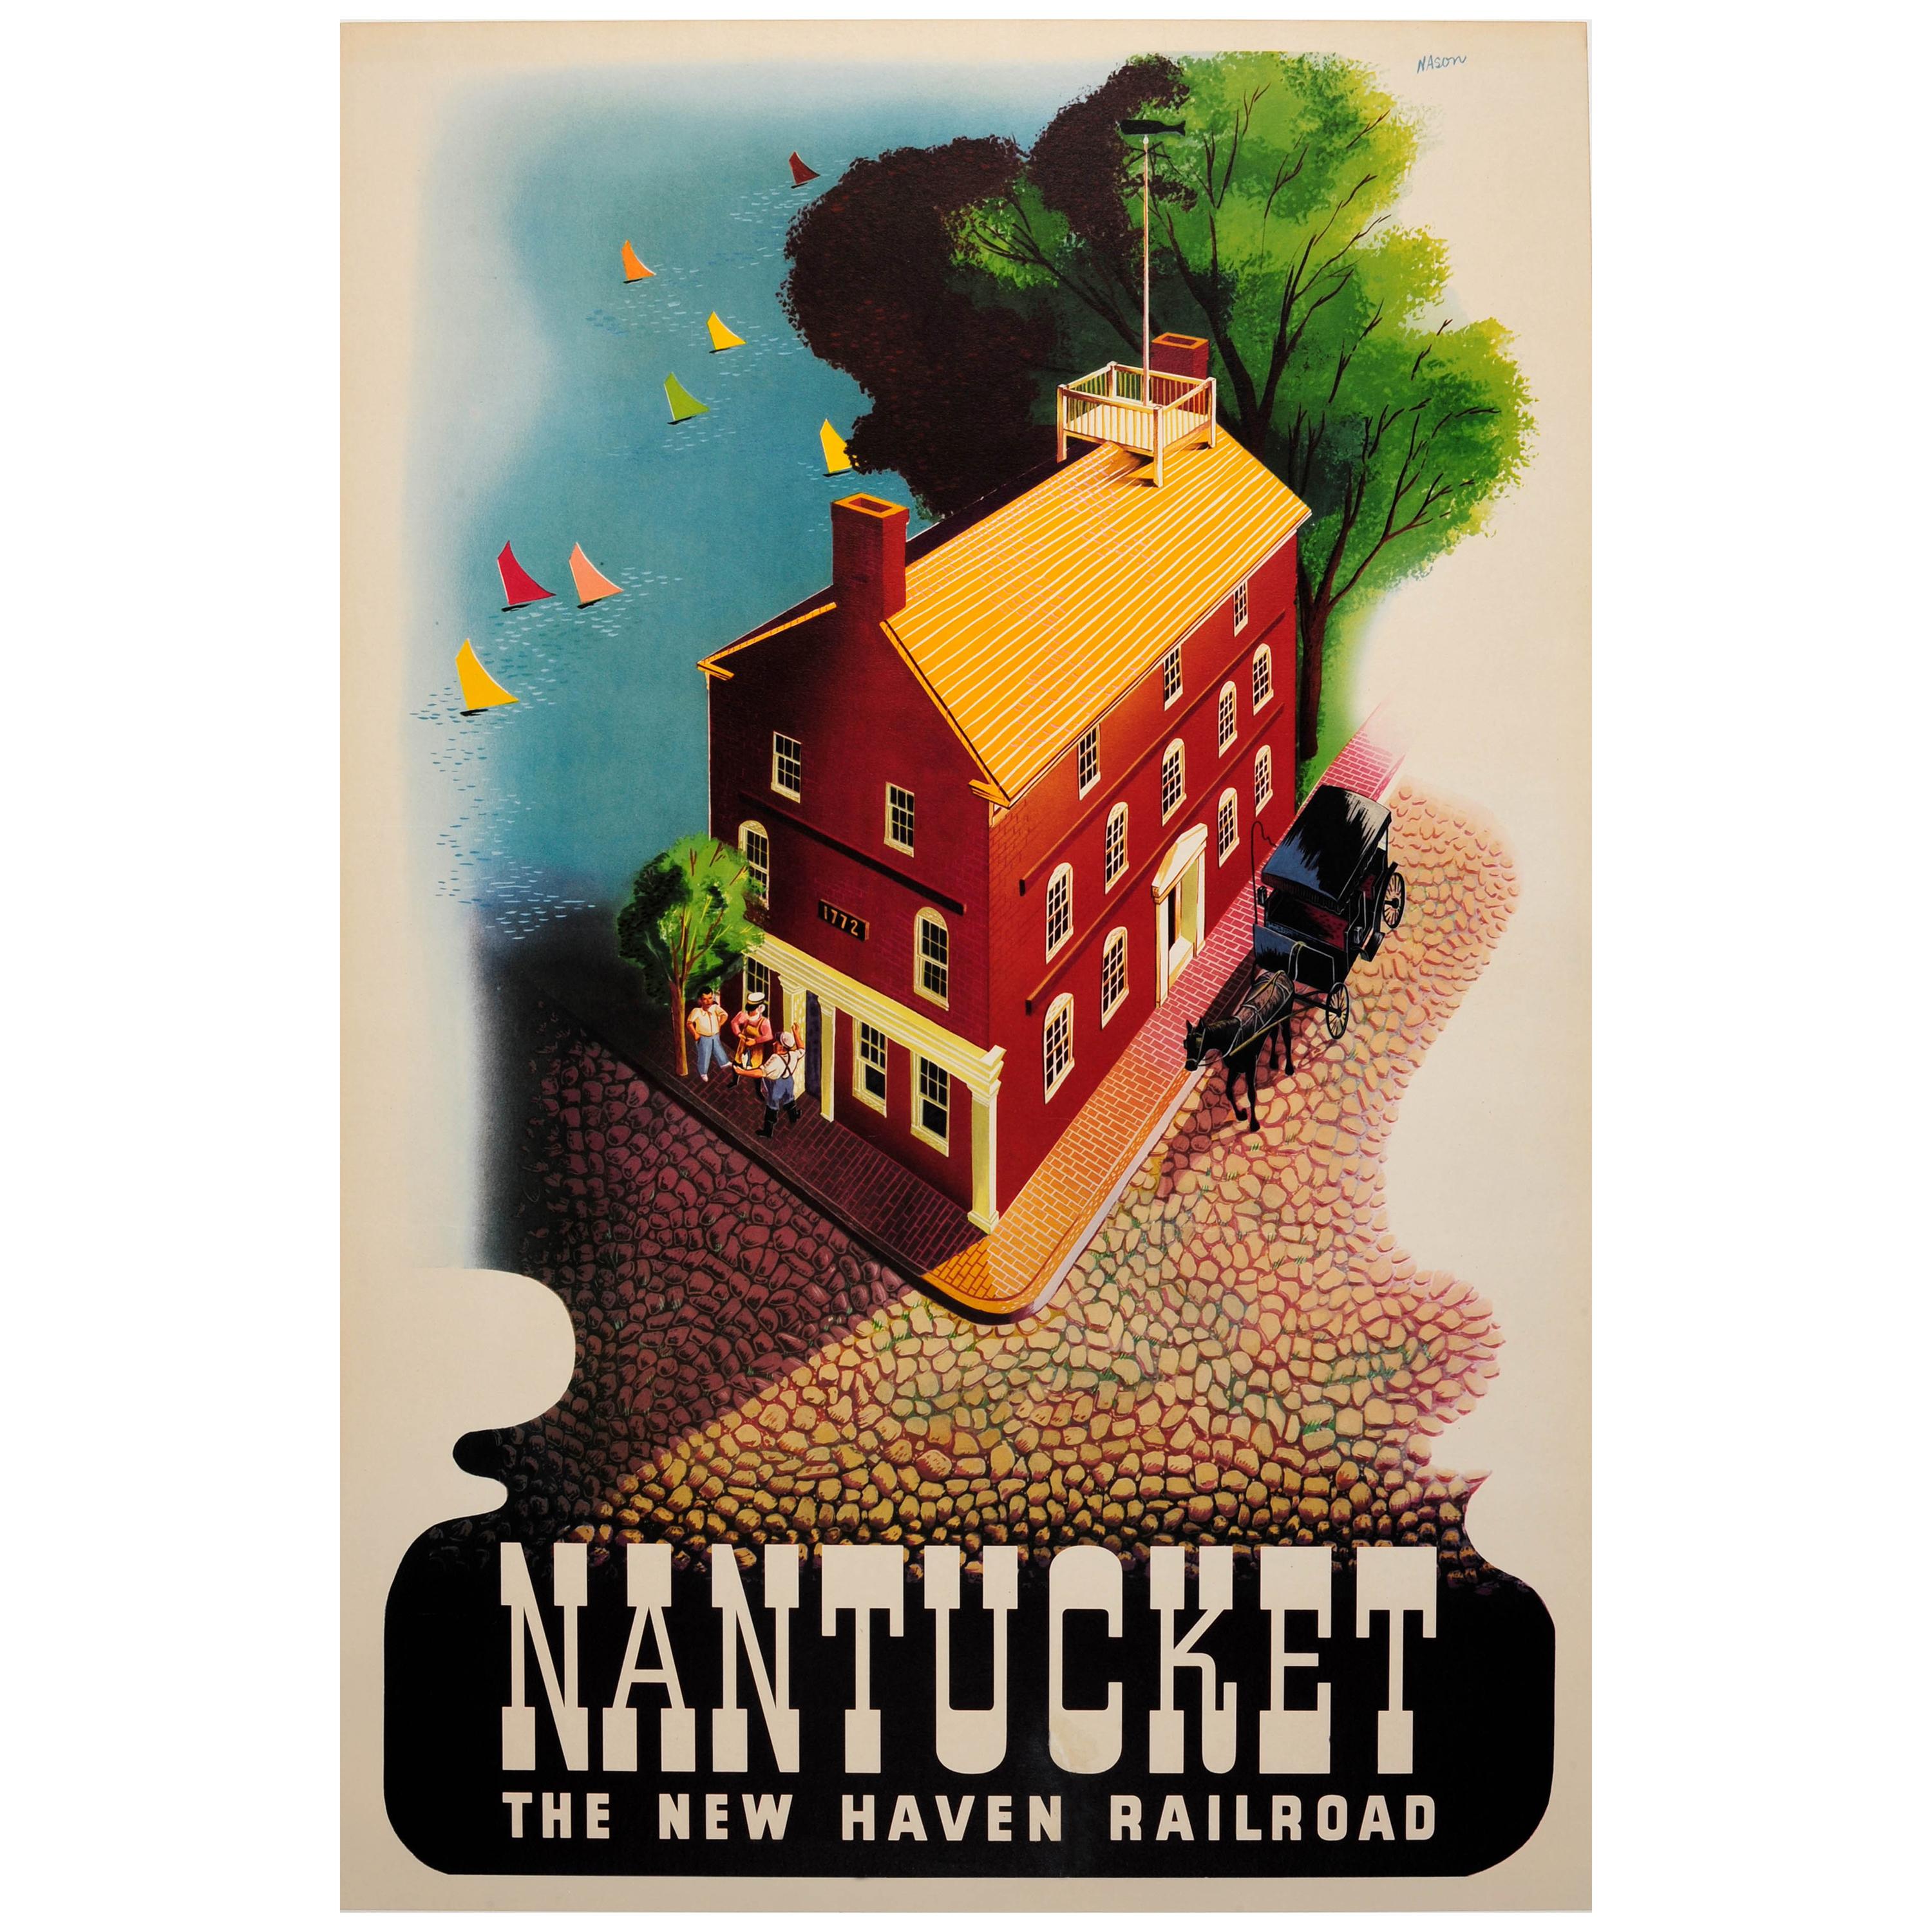 Original Vintage Poster for Nantucket The New Haven Railroad Ft. 1772 Courthouse For Sale